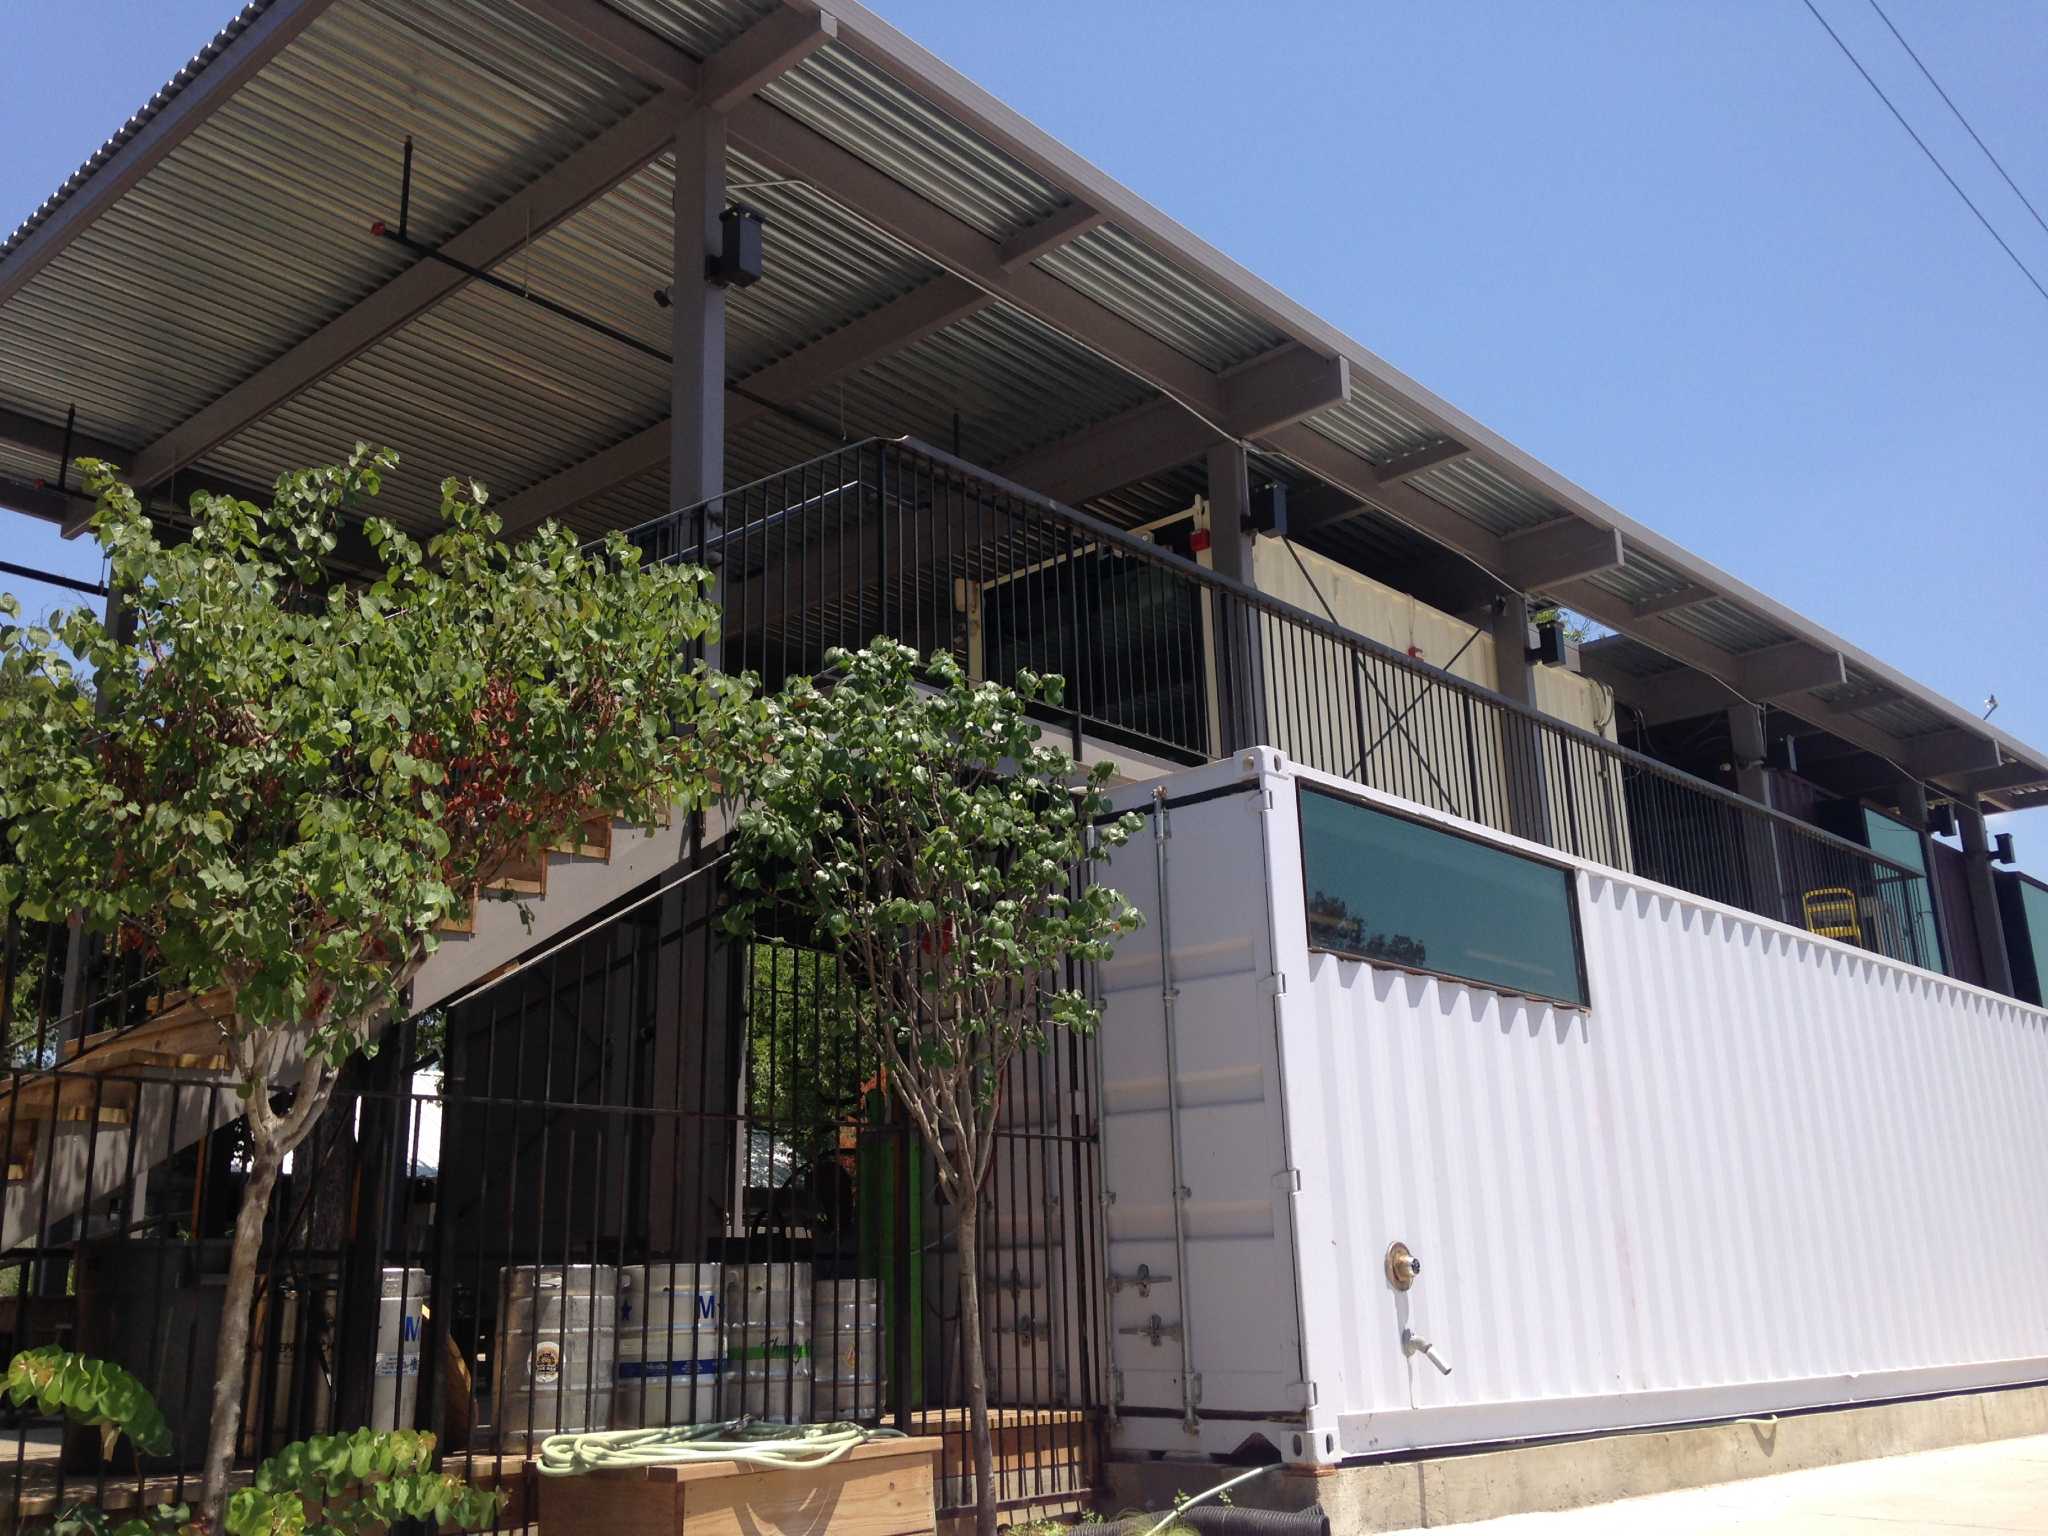 Little River Box Company  Shipping Container Restaurants, Bars